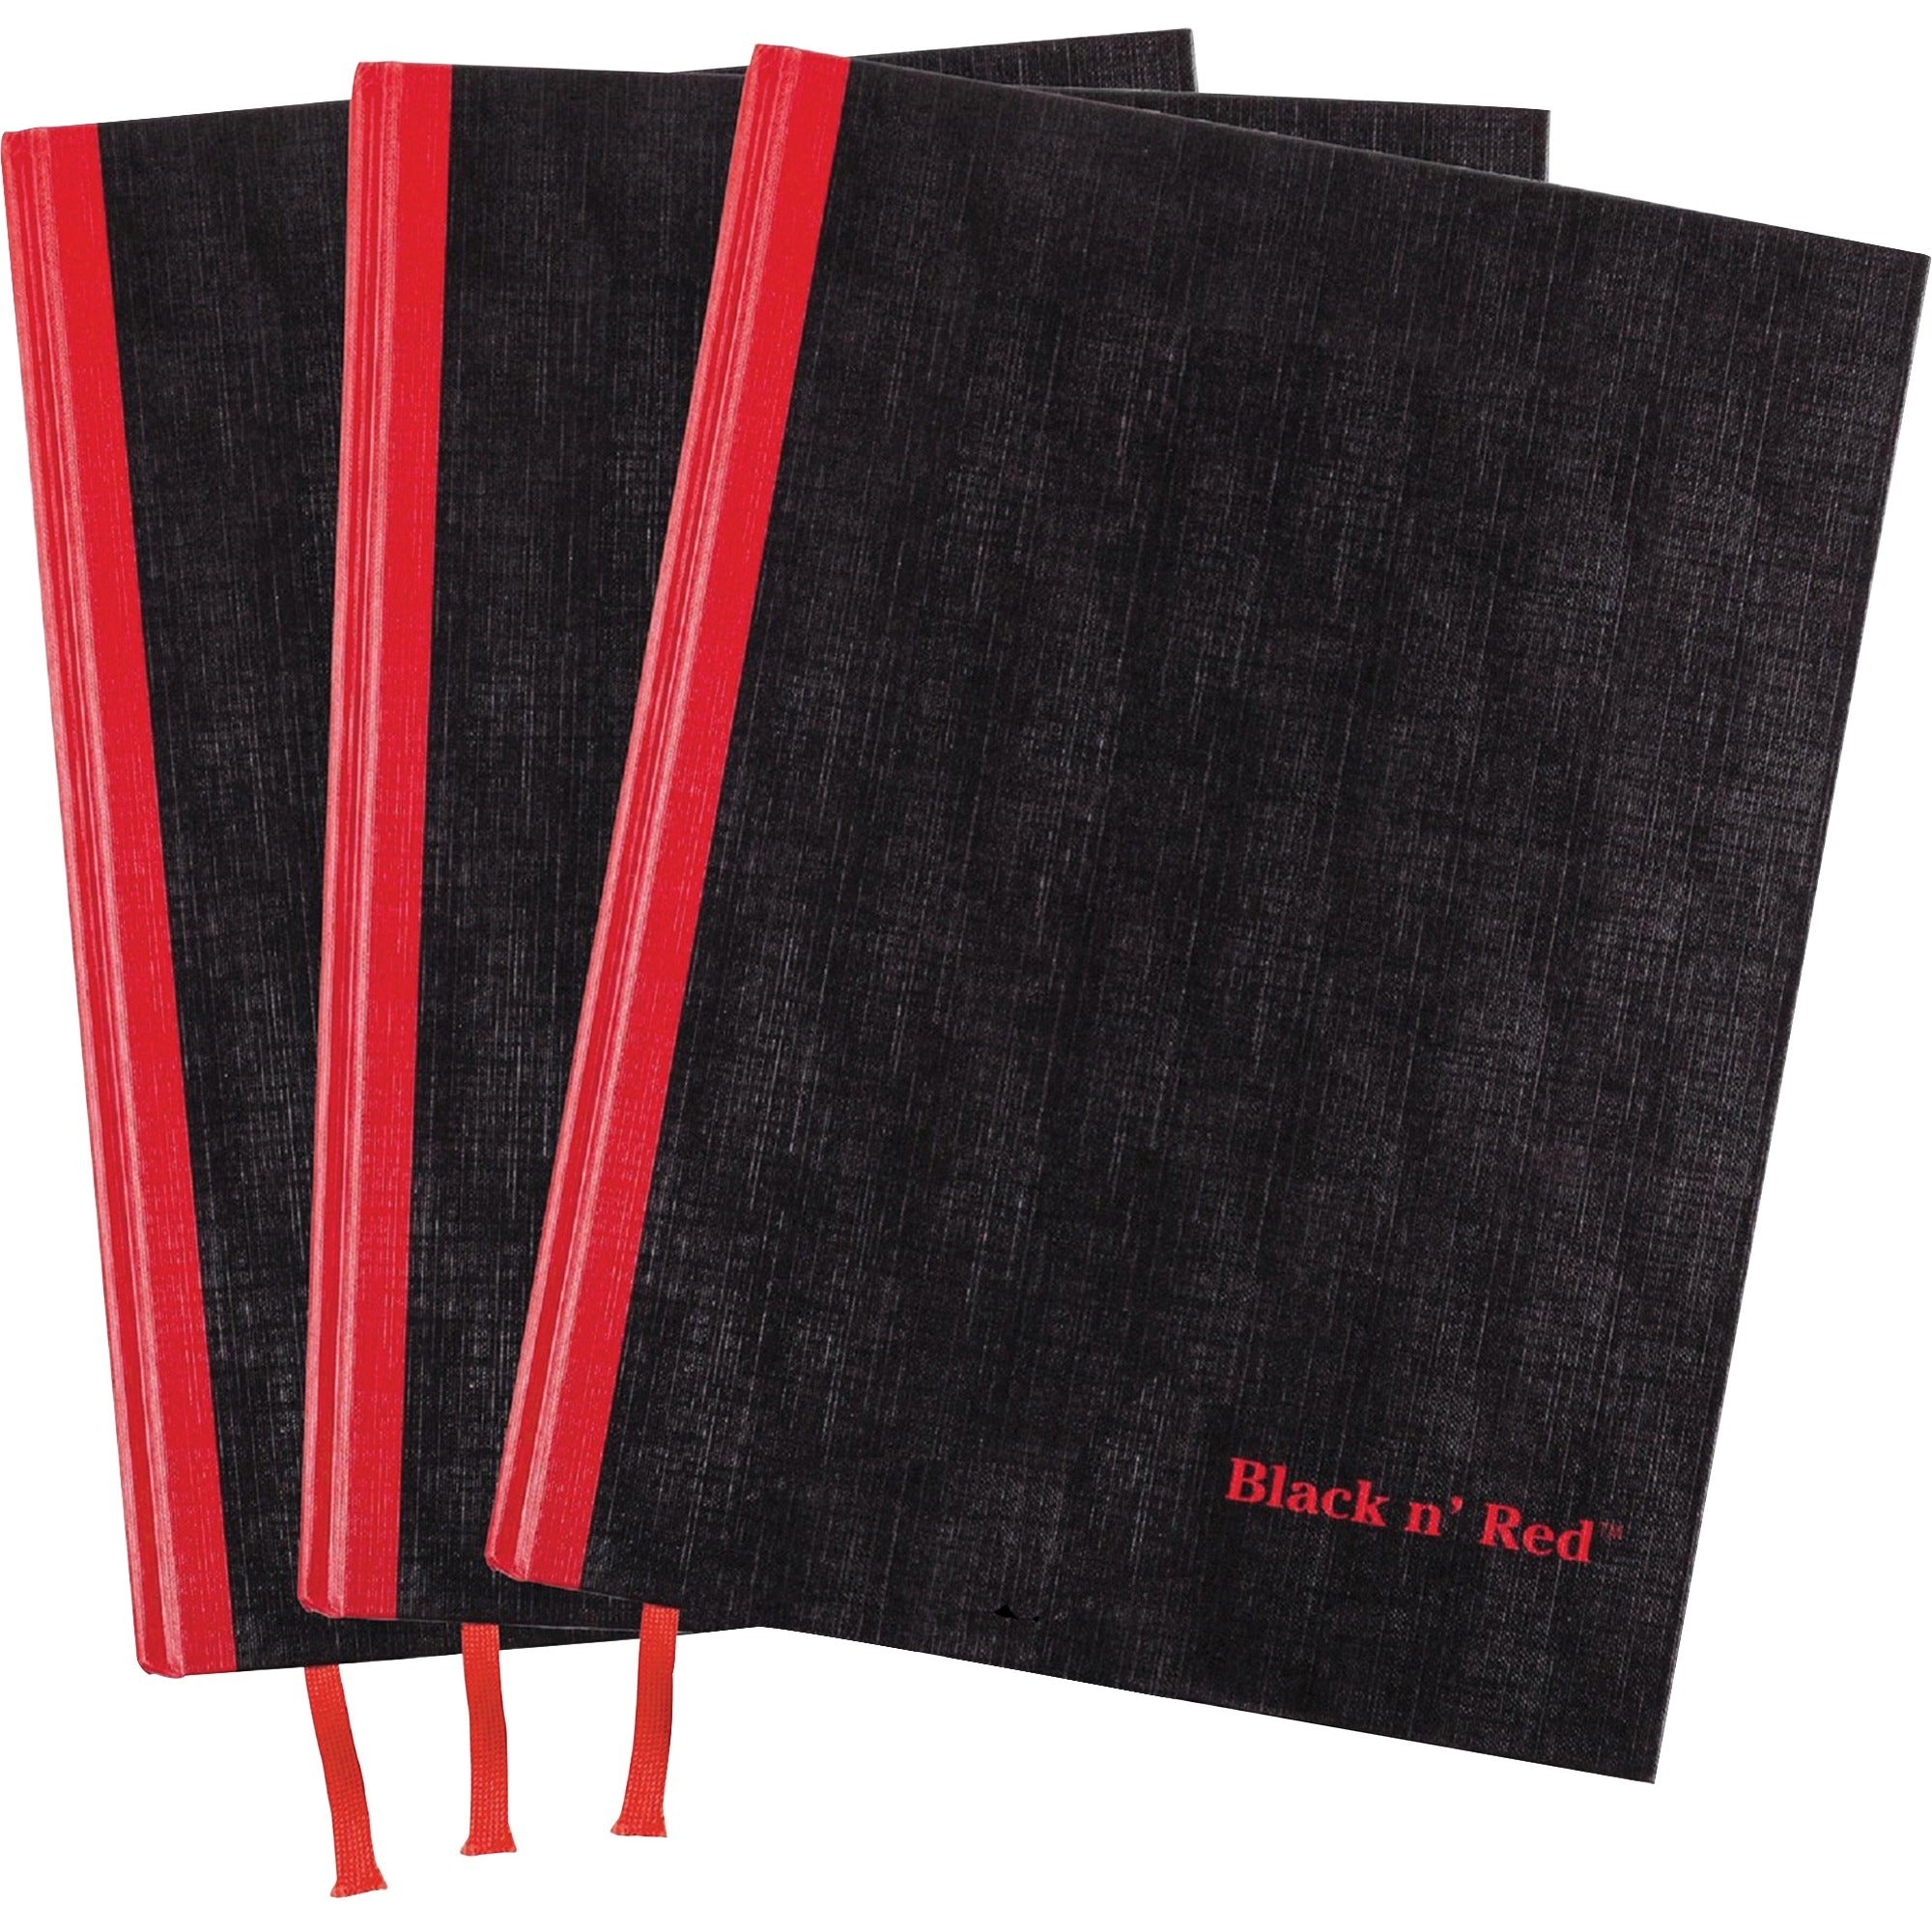 black-n-red-casebound-hardcover-notebook-3-pack-case-bound-12-x-85-x-17-matte-cover-hard-cover-bleed-resistant-ribbon-marker-3-pack_jdk400123487 - 1